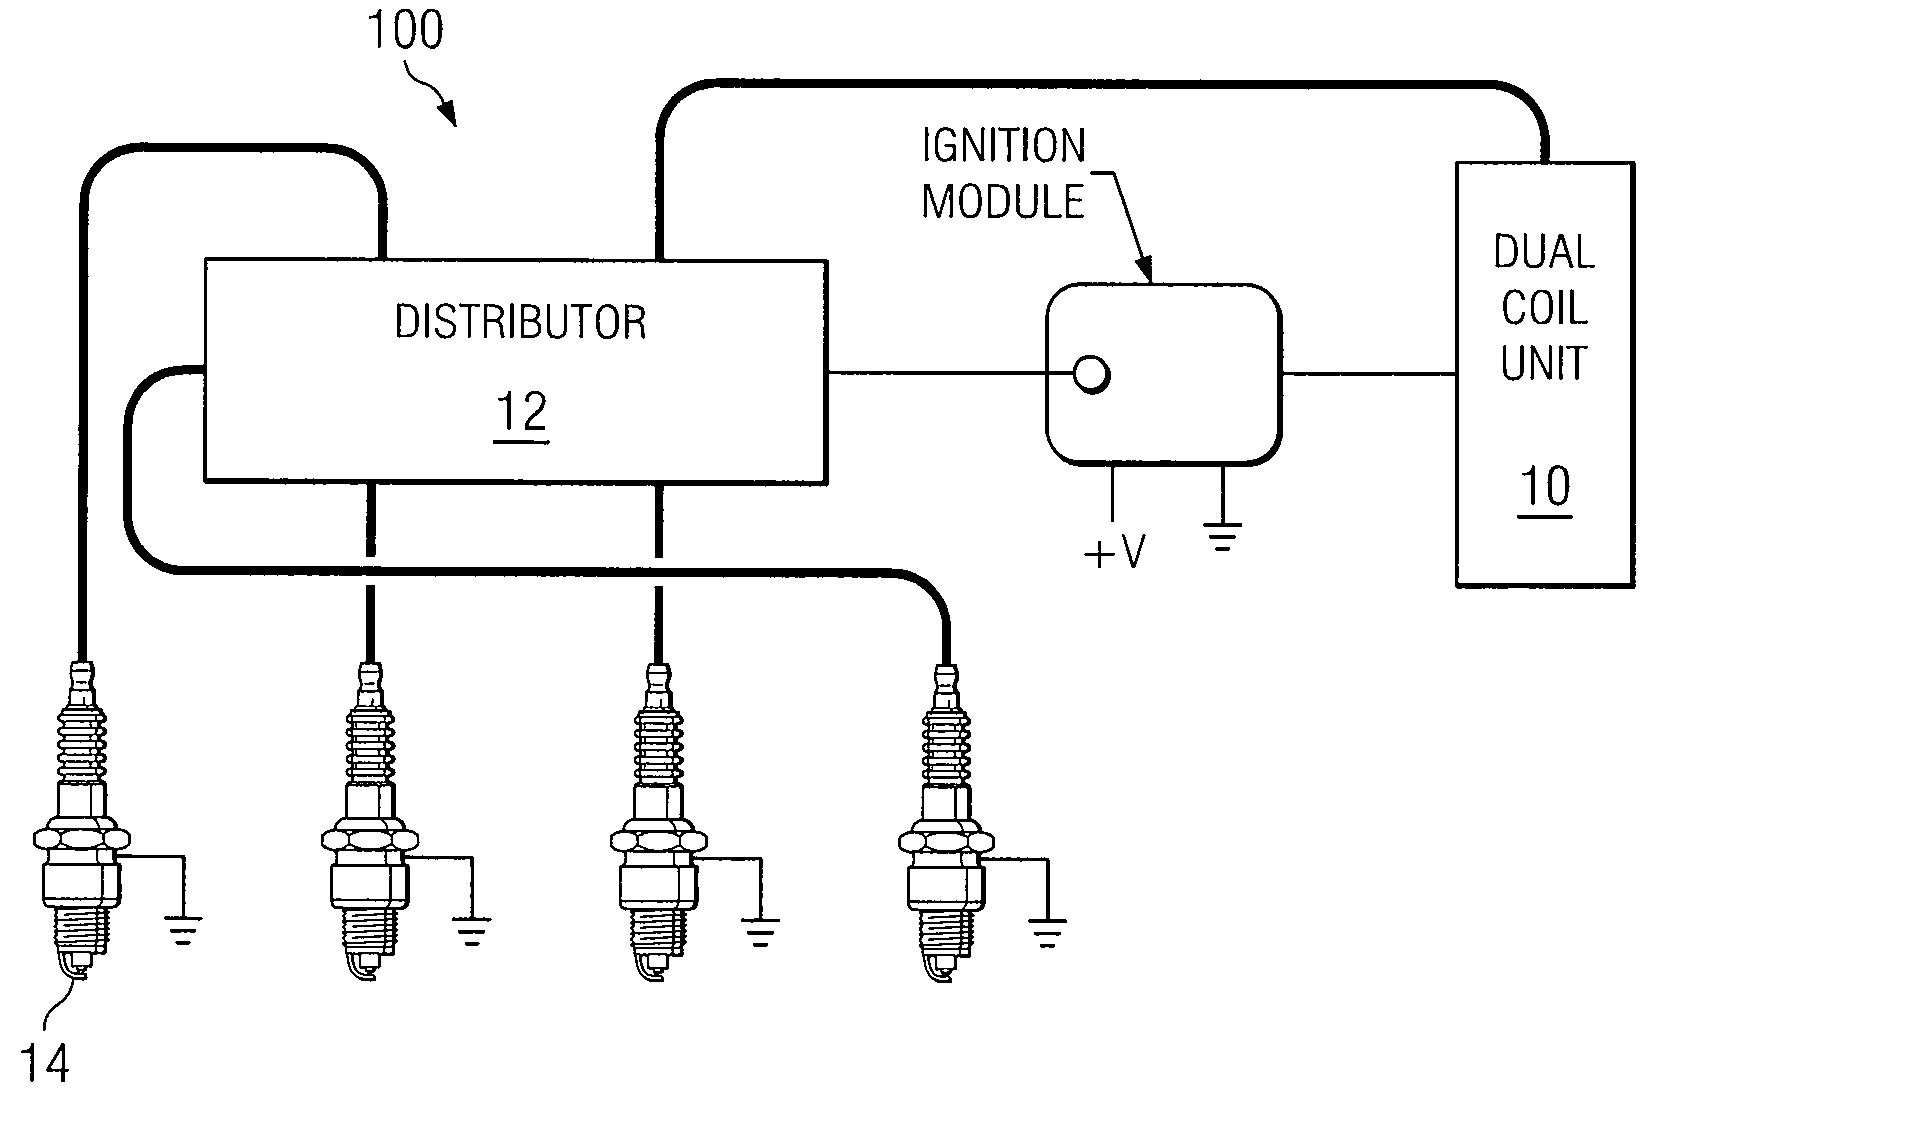 Dual coil ignition circuit for spark ignited engine